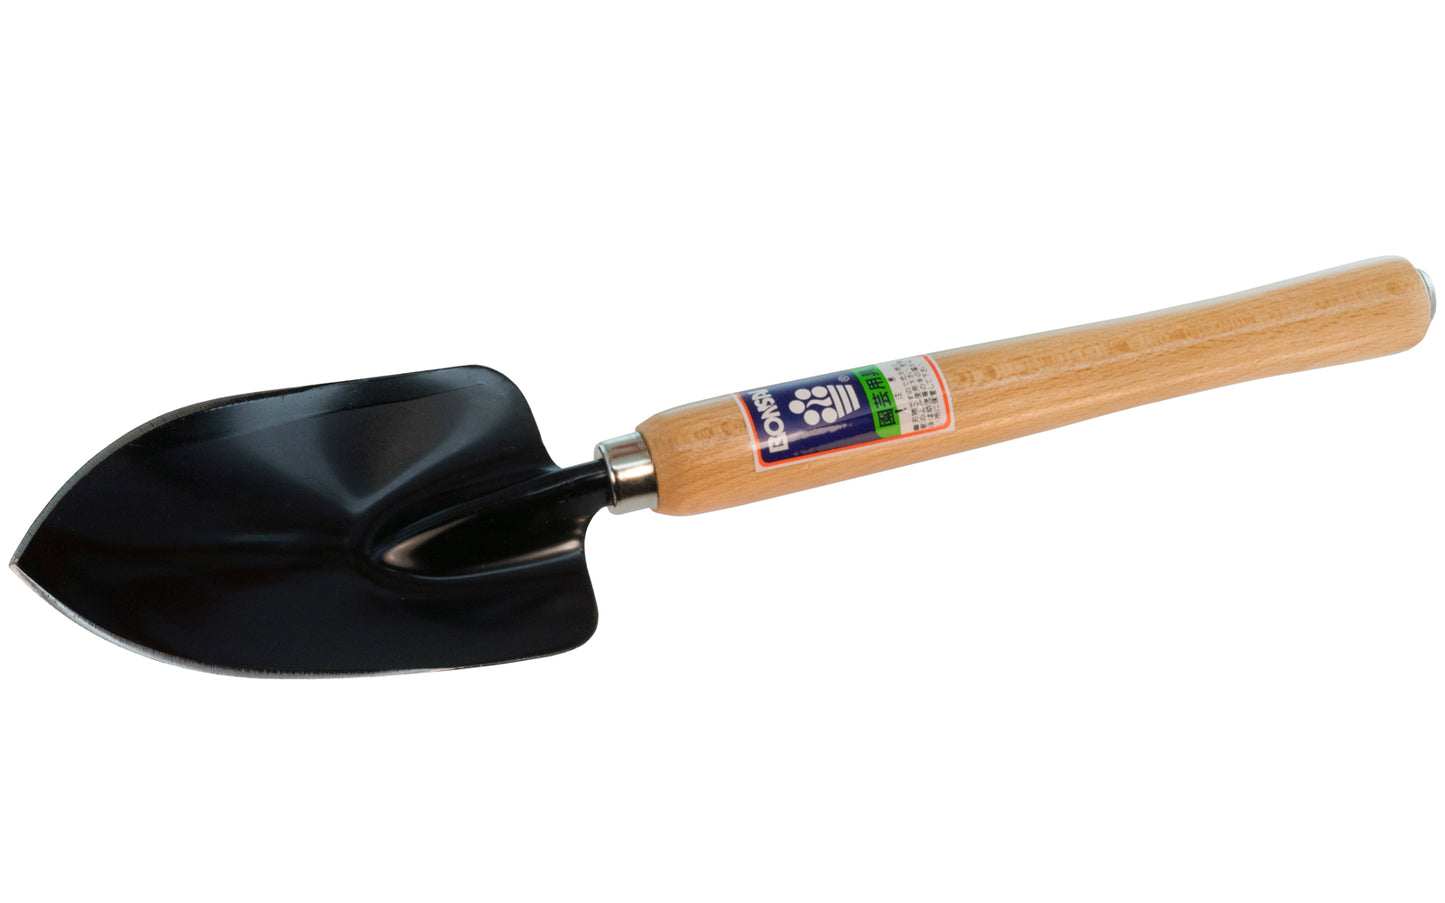 Japanese Garden Trowel With Long Handle. Made of high carbon steel with a black finish. Lacquered hardwood handle with nickel ferrule. 4934740051014.  Made in Japan.